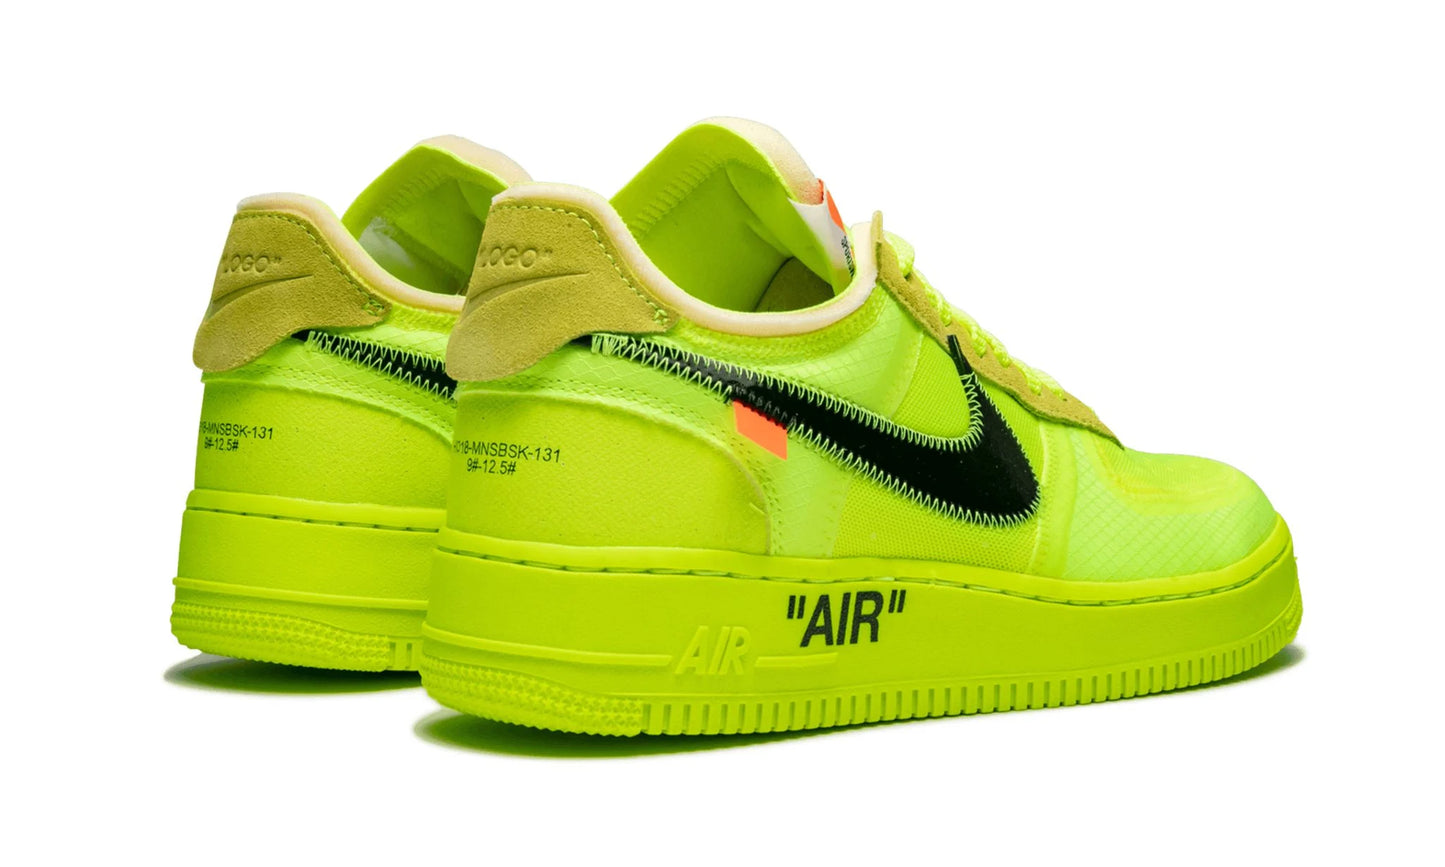 Nike Air Force 1 "Off-White Volt"